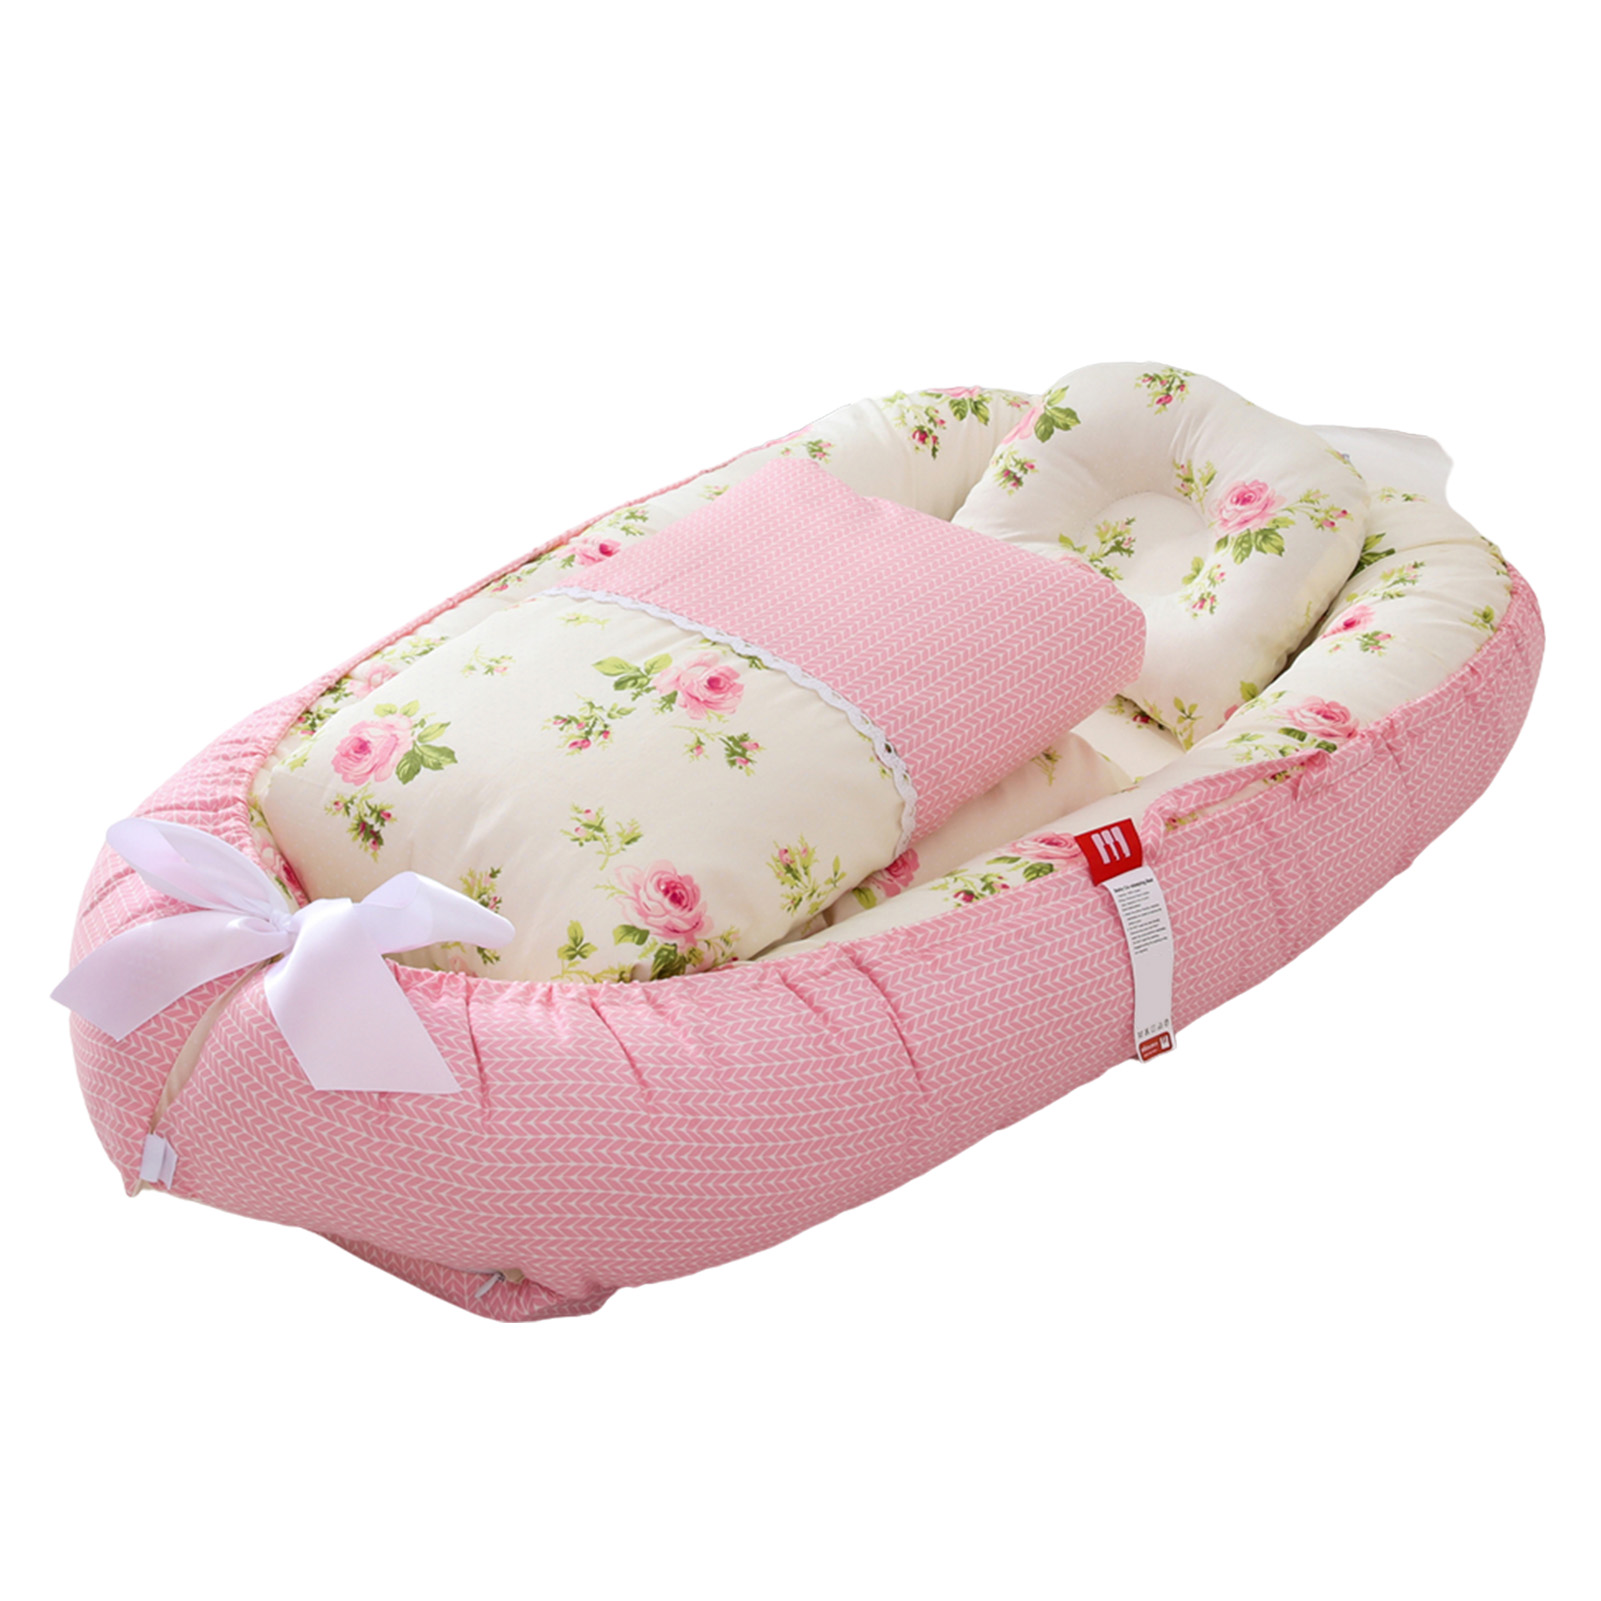 Baby Nest Bed With Pillow And Quilt Portable Crib Travel Bed Infant Toddler Cotton Cradle For Newborn Baby Bed Bassinet Bumper